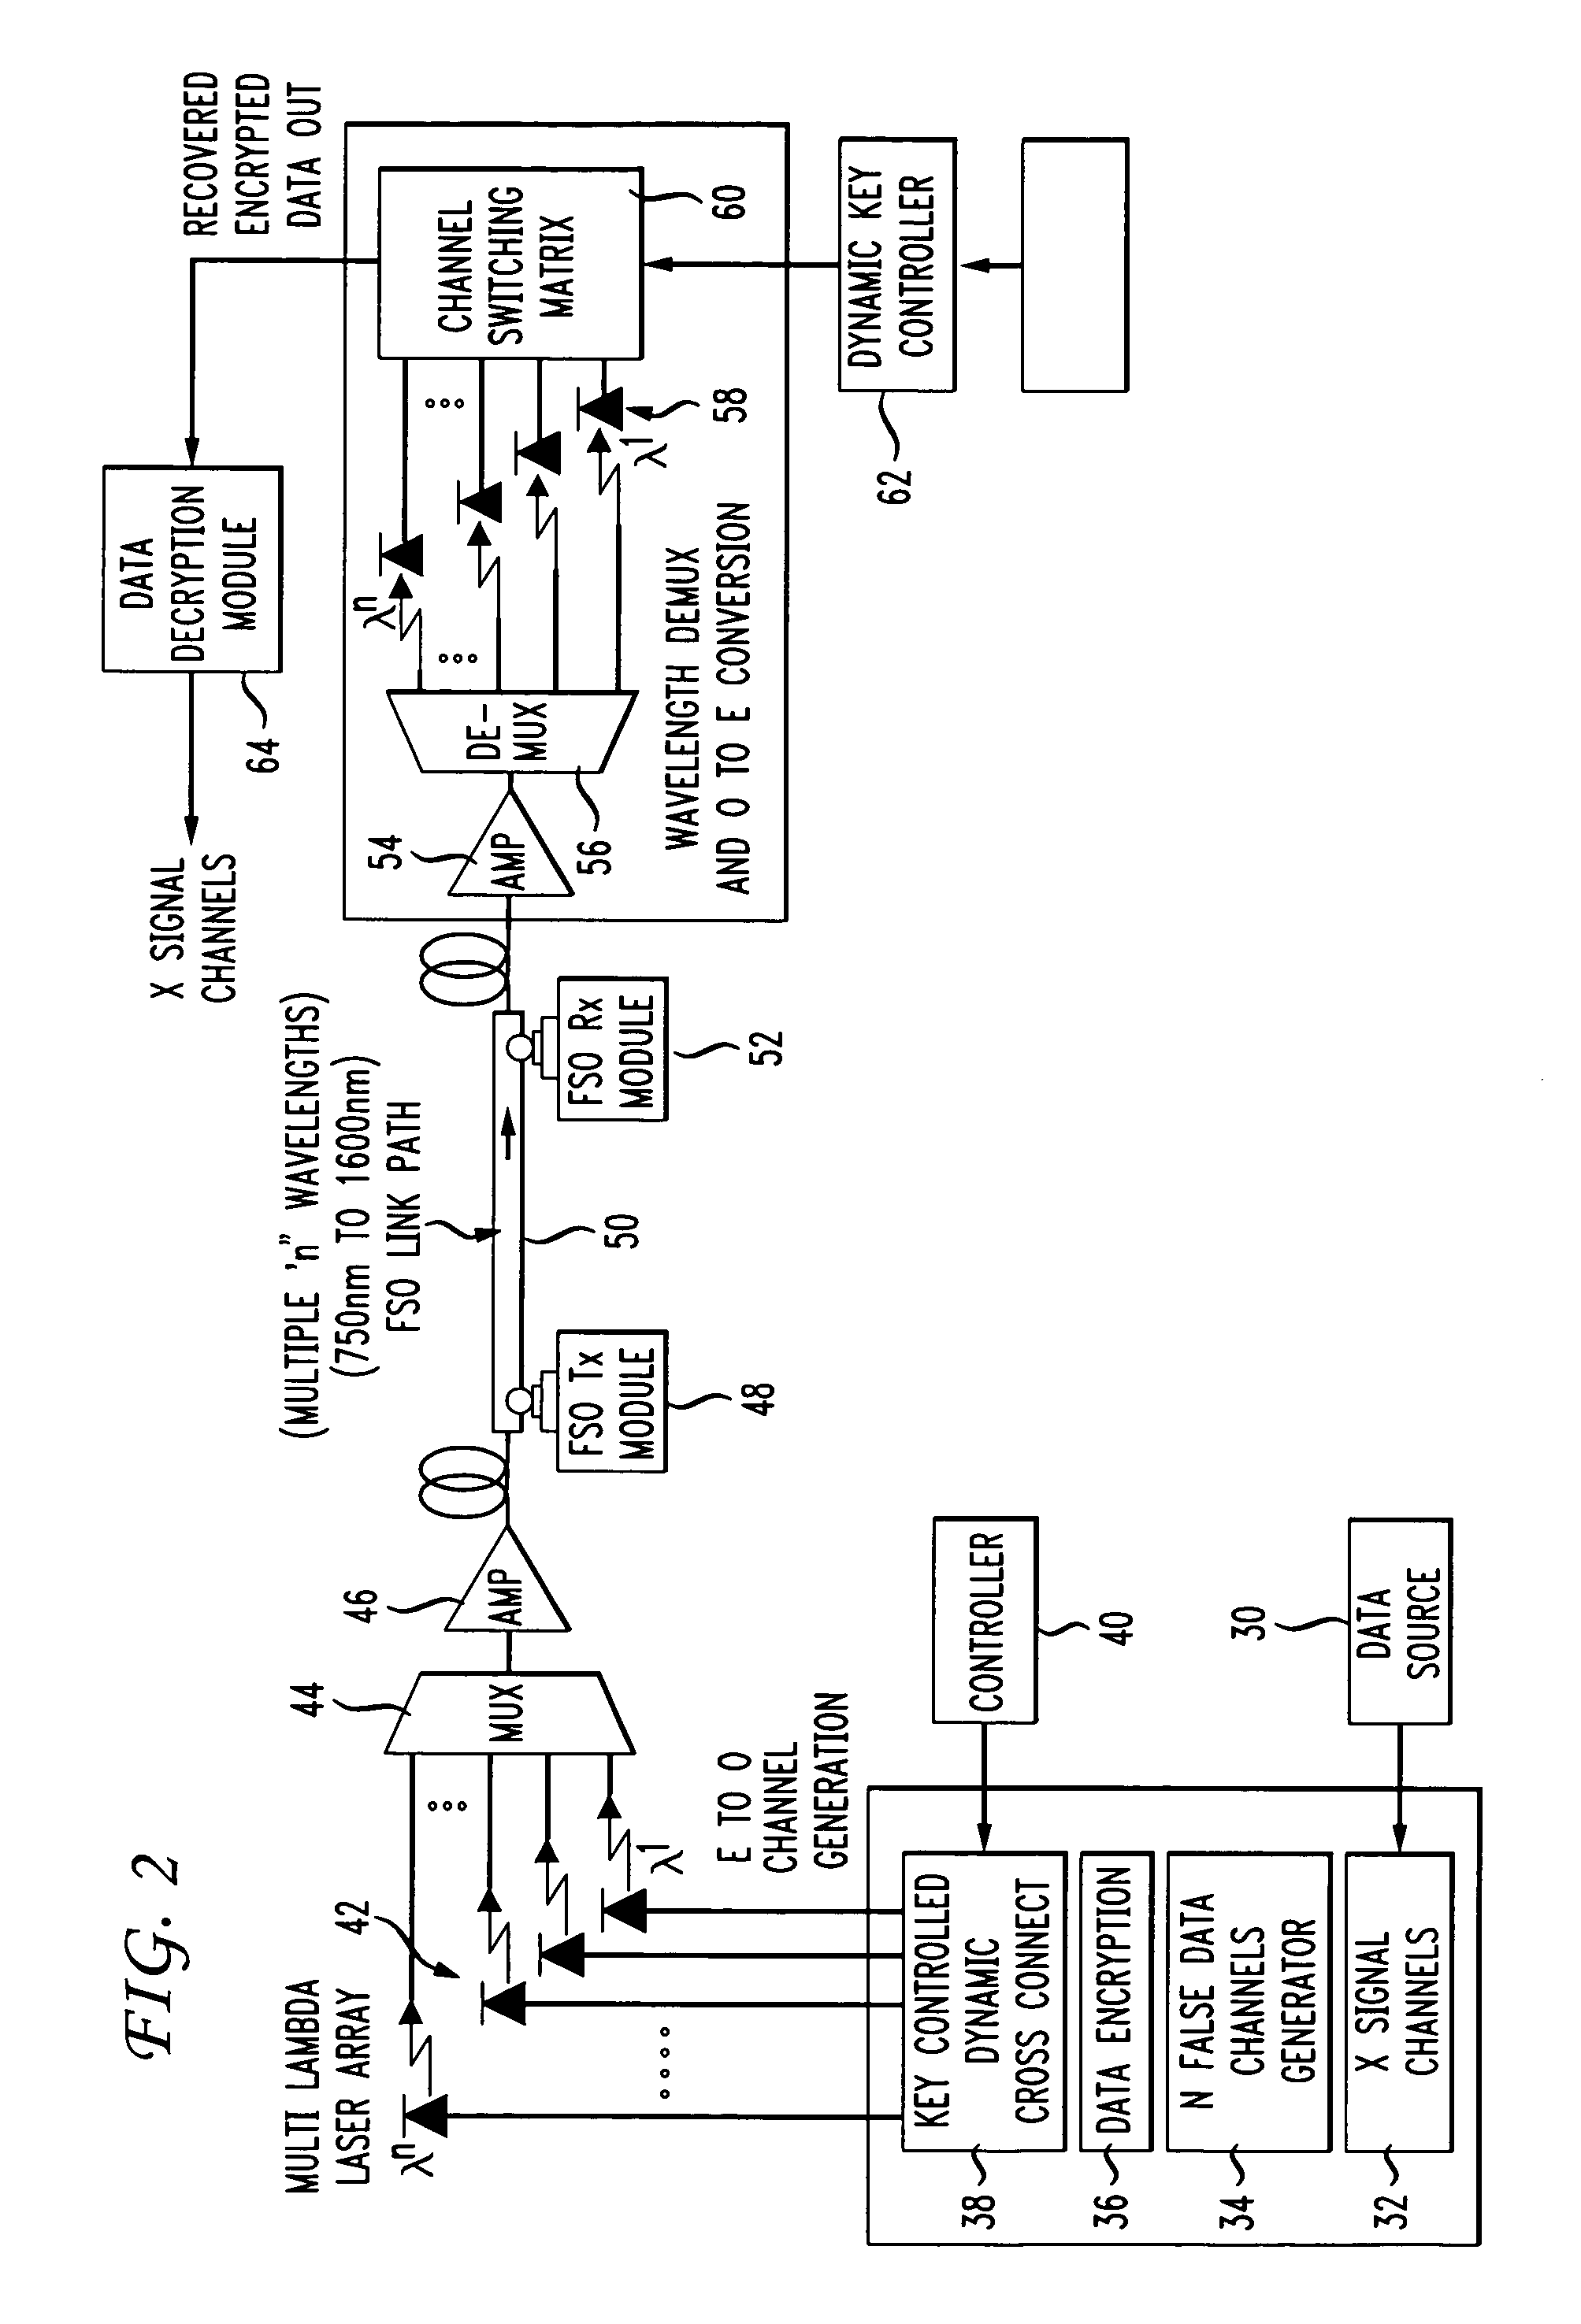 Secure open-air communication system utilizing multi-channel decoyed transmission